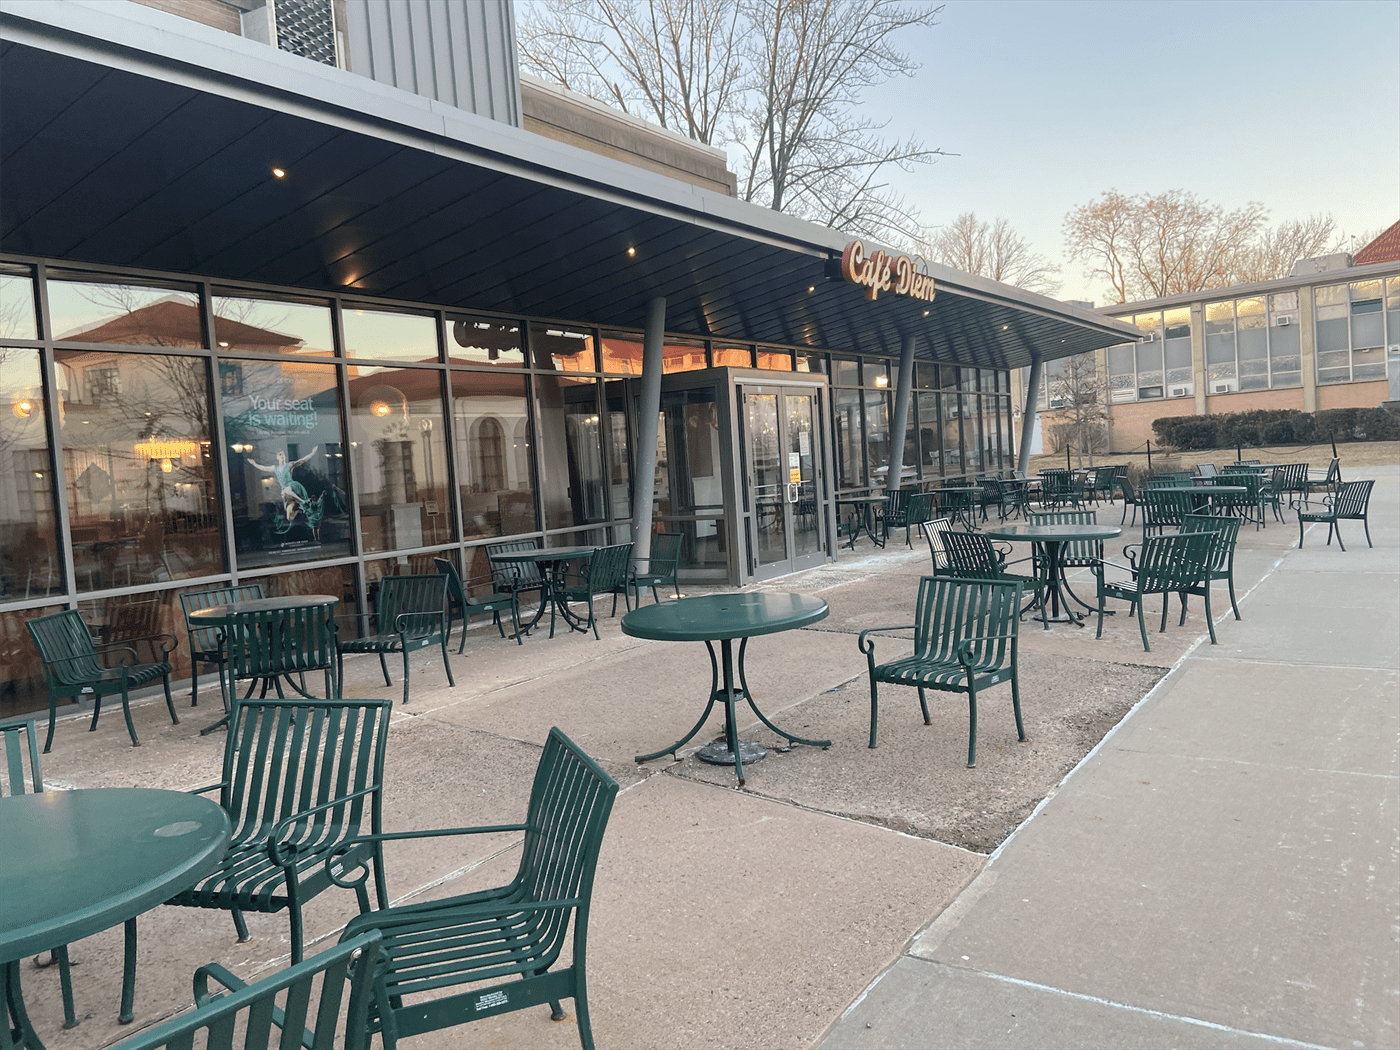 Cafe Diem is located right in the middle of campus, making it a great meet-up spot. Emma Caughlan | The Montclarion